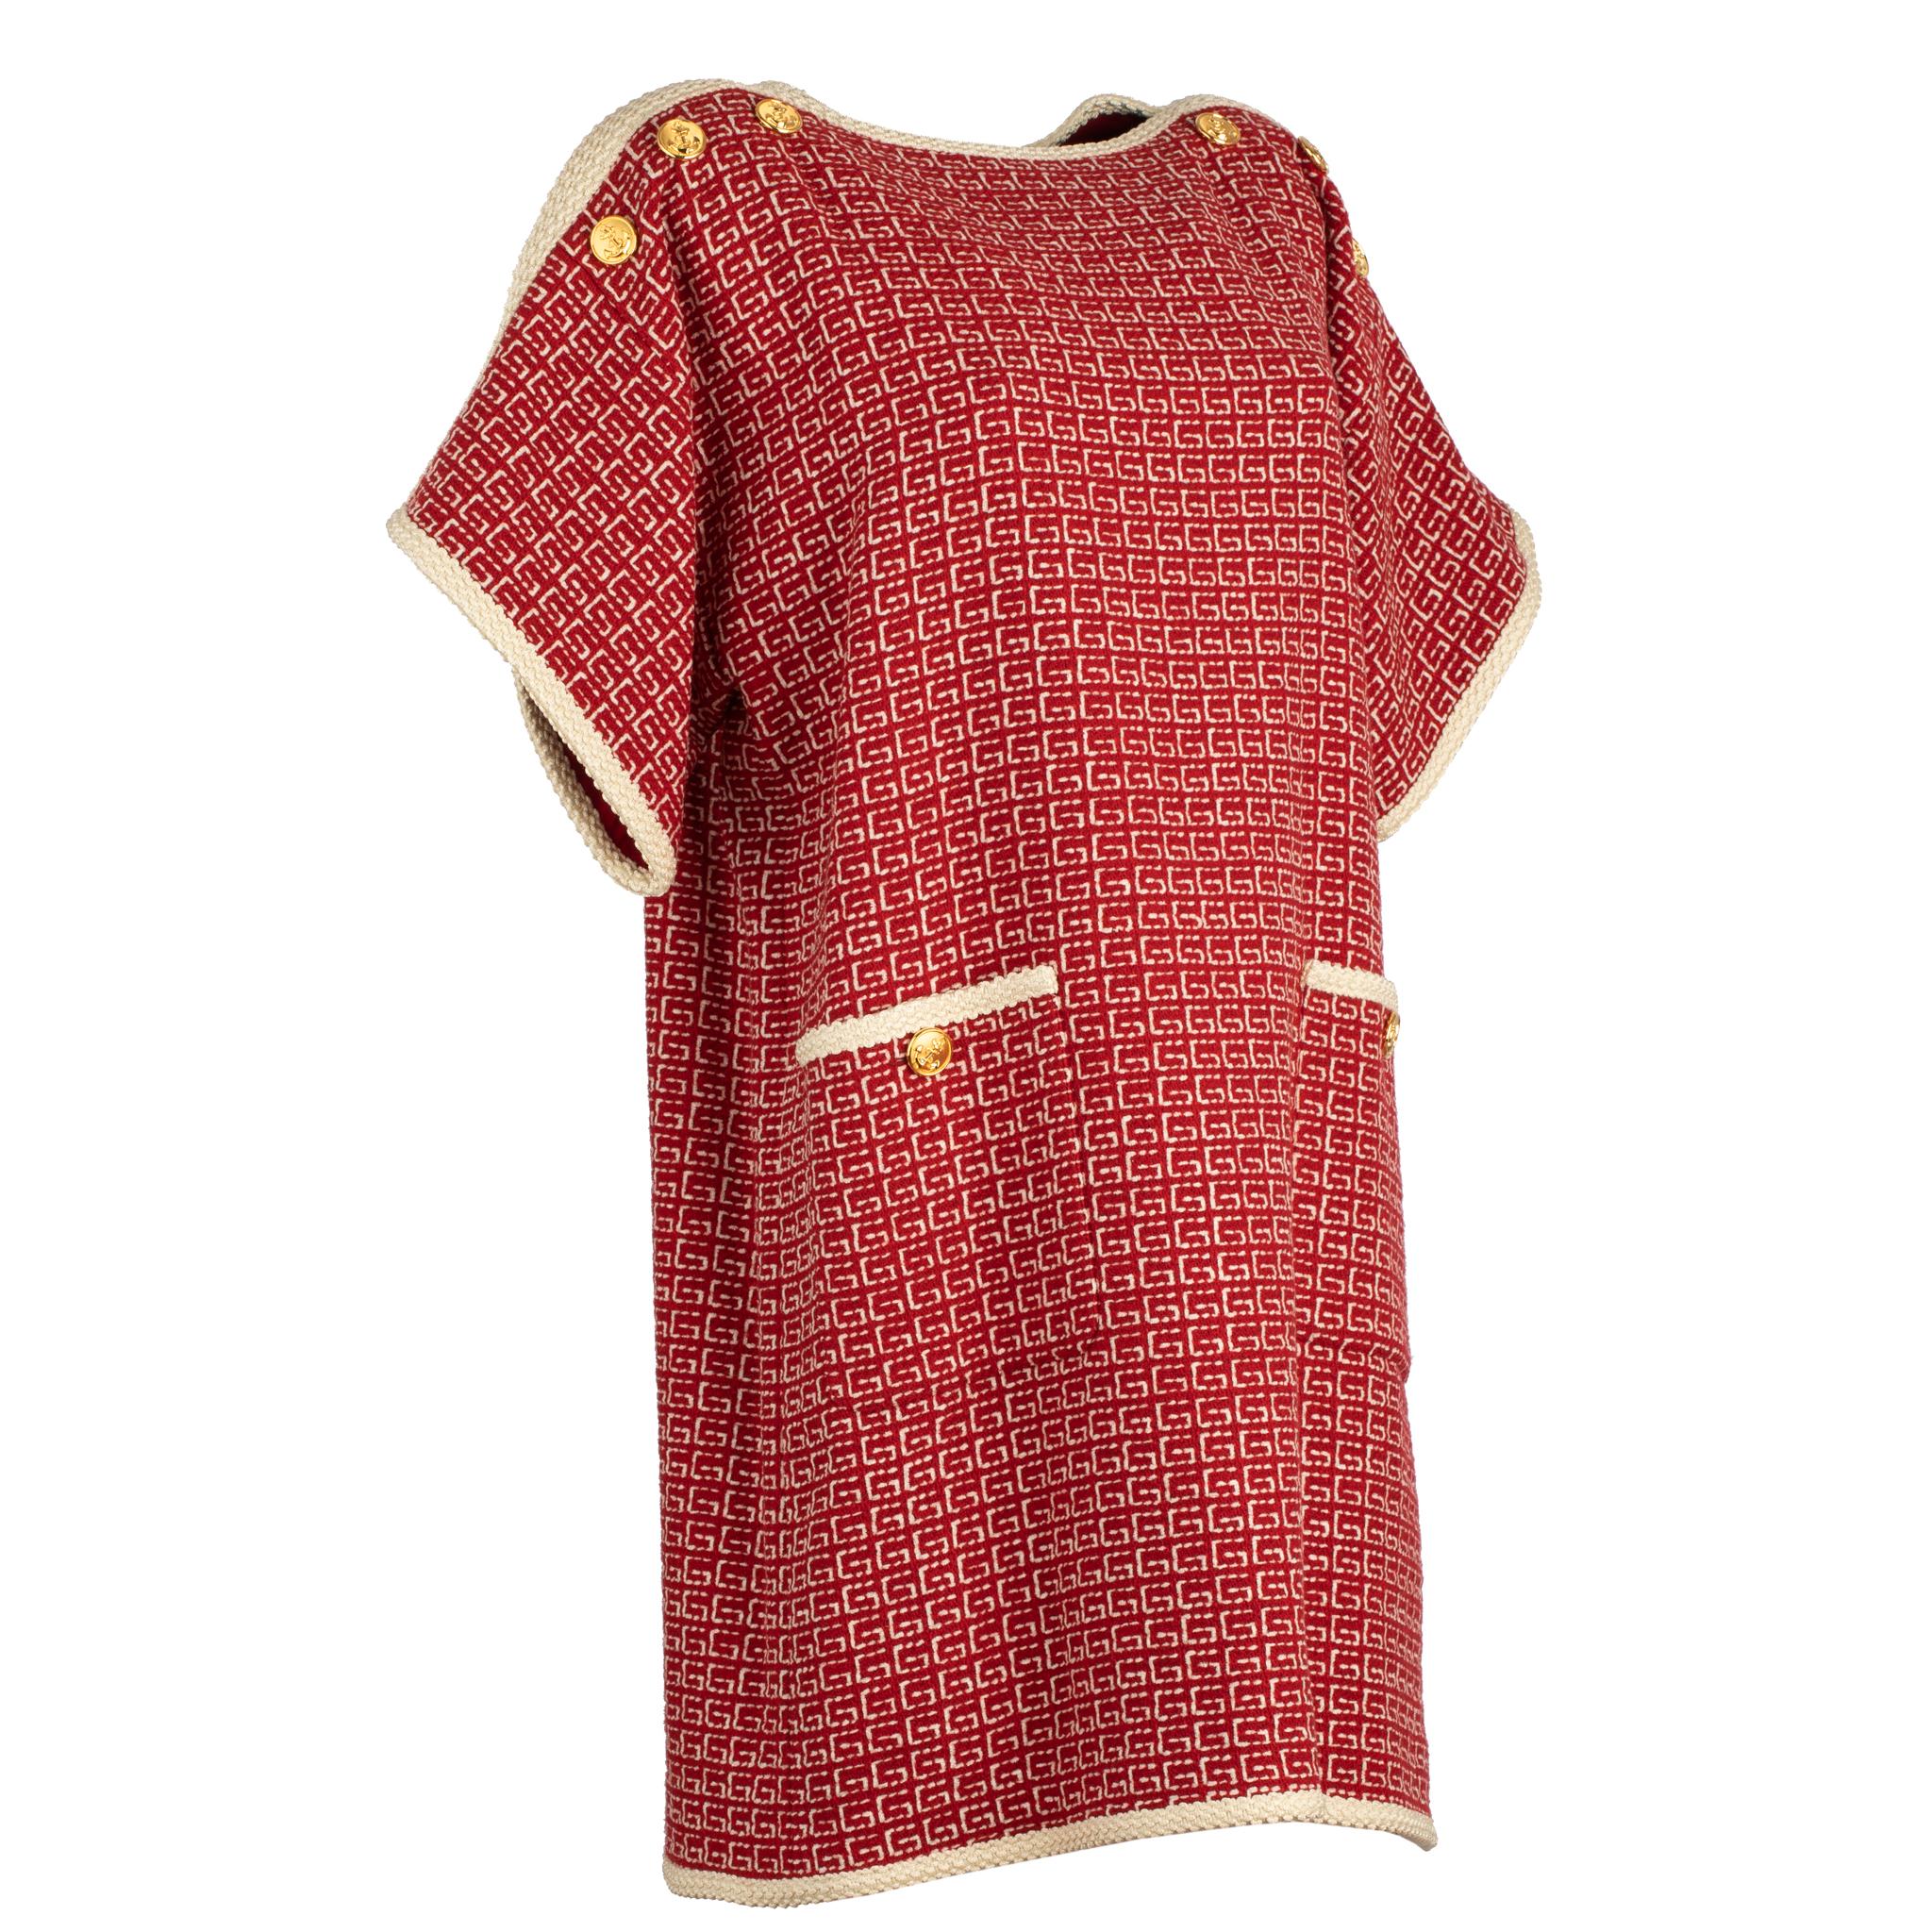 Gucci Tweed Red & Off-White Tunic Dress 38 IT For Sale 8